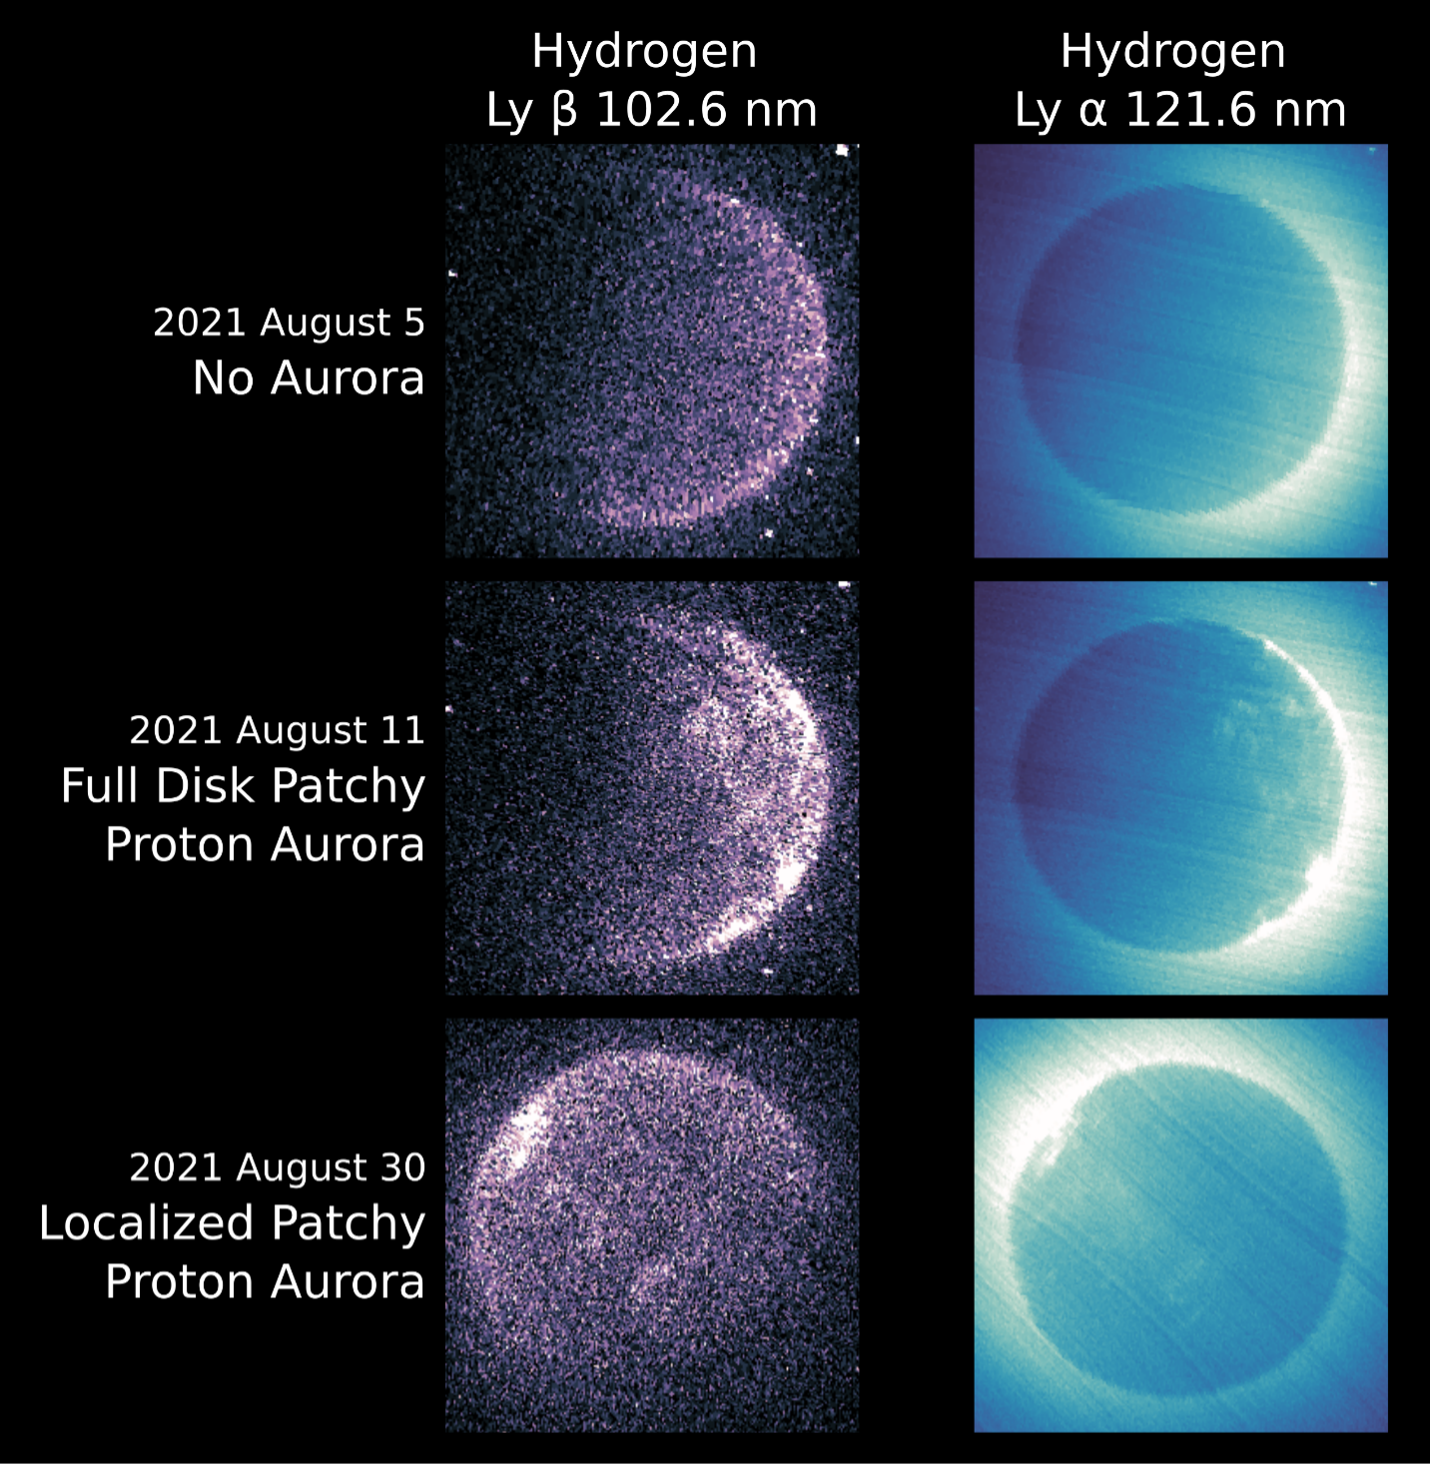 Images from the Hope orbiter's EMUS instrument showing auroral activity at Mars.